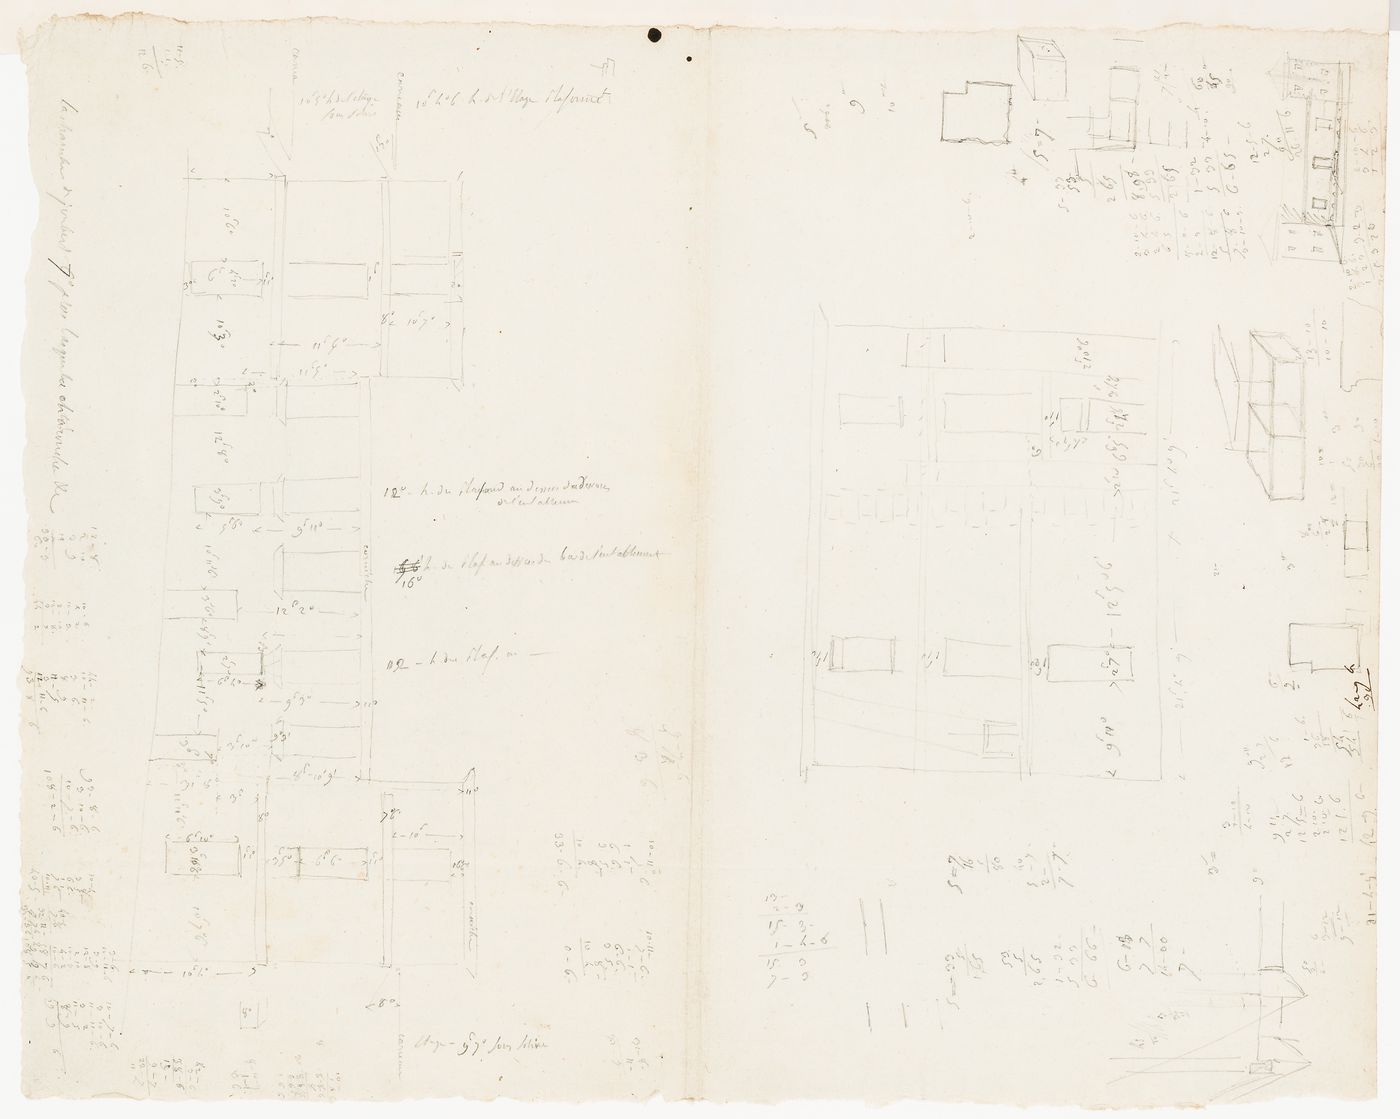 Sketch elevations and dimensioning of the house, and preliminary sketches, probably for renovations, Domaine de La Vallée